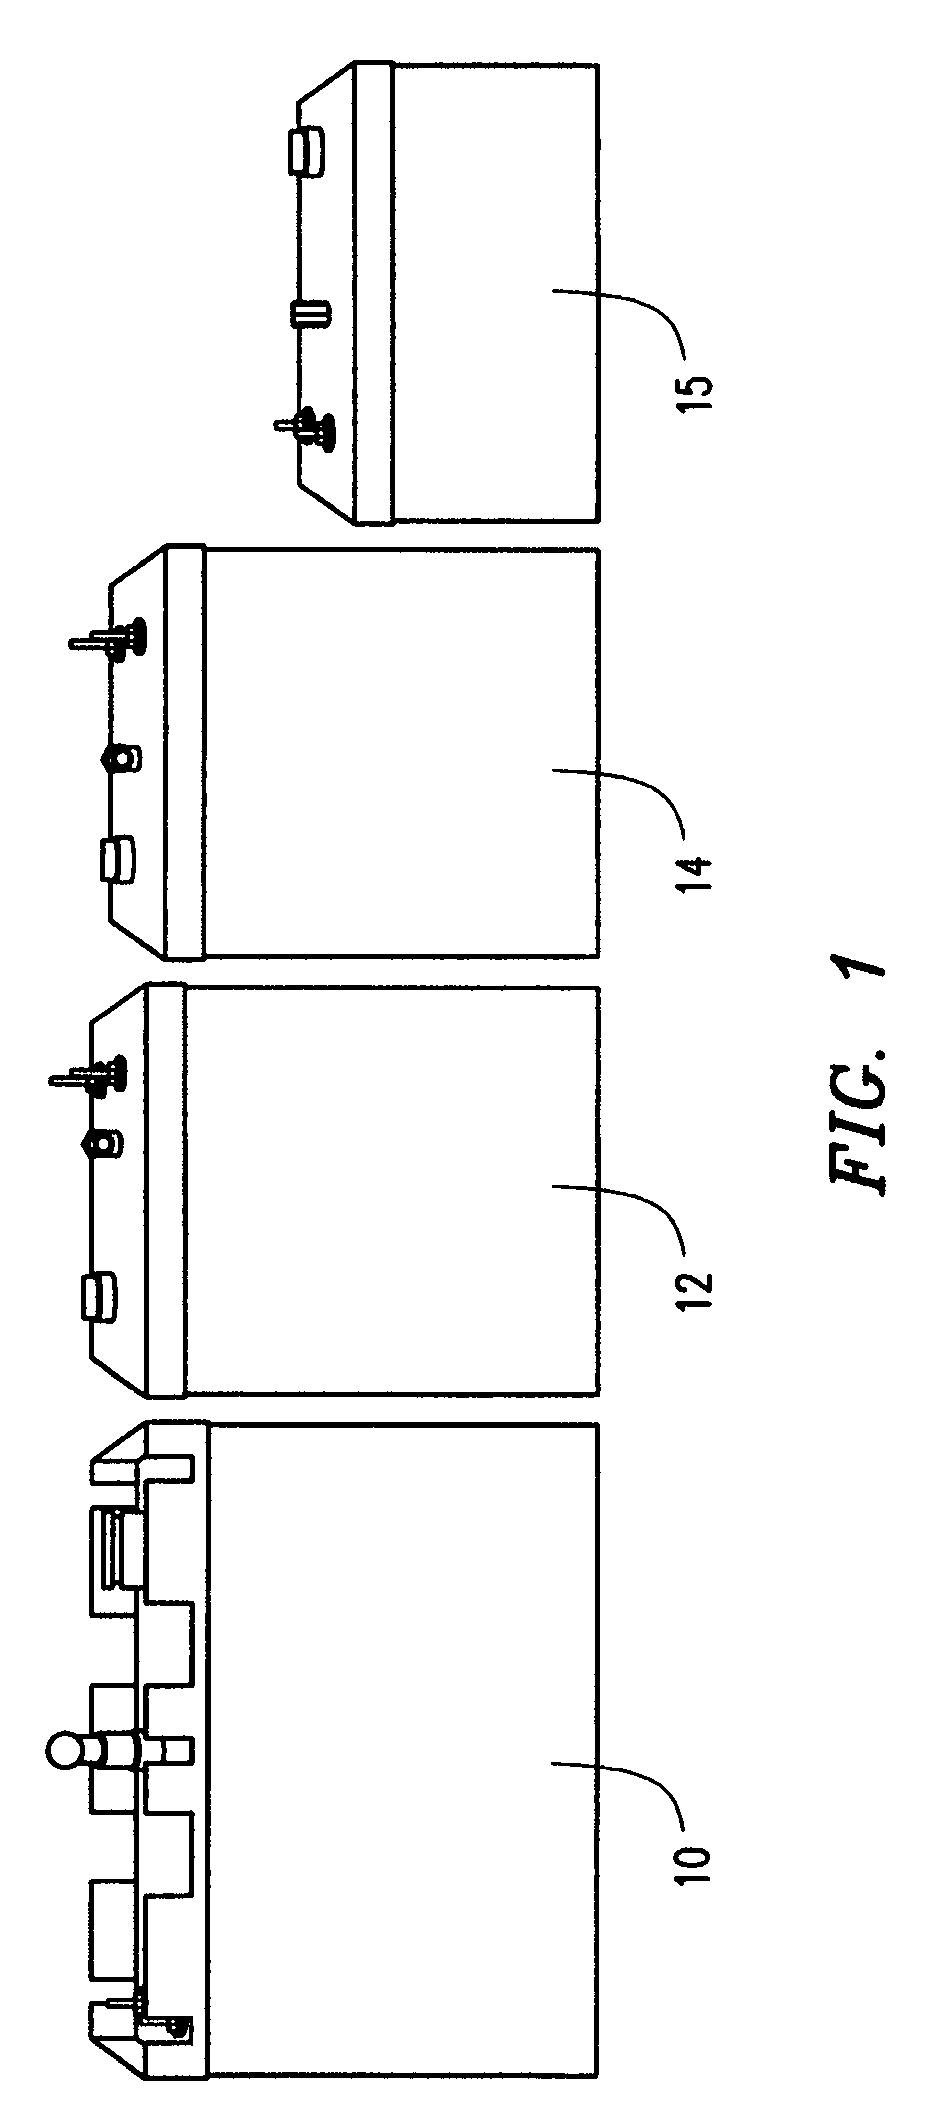 Method of and apparatus for hydrogen enhanced diesel engine performance